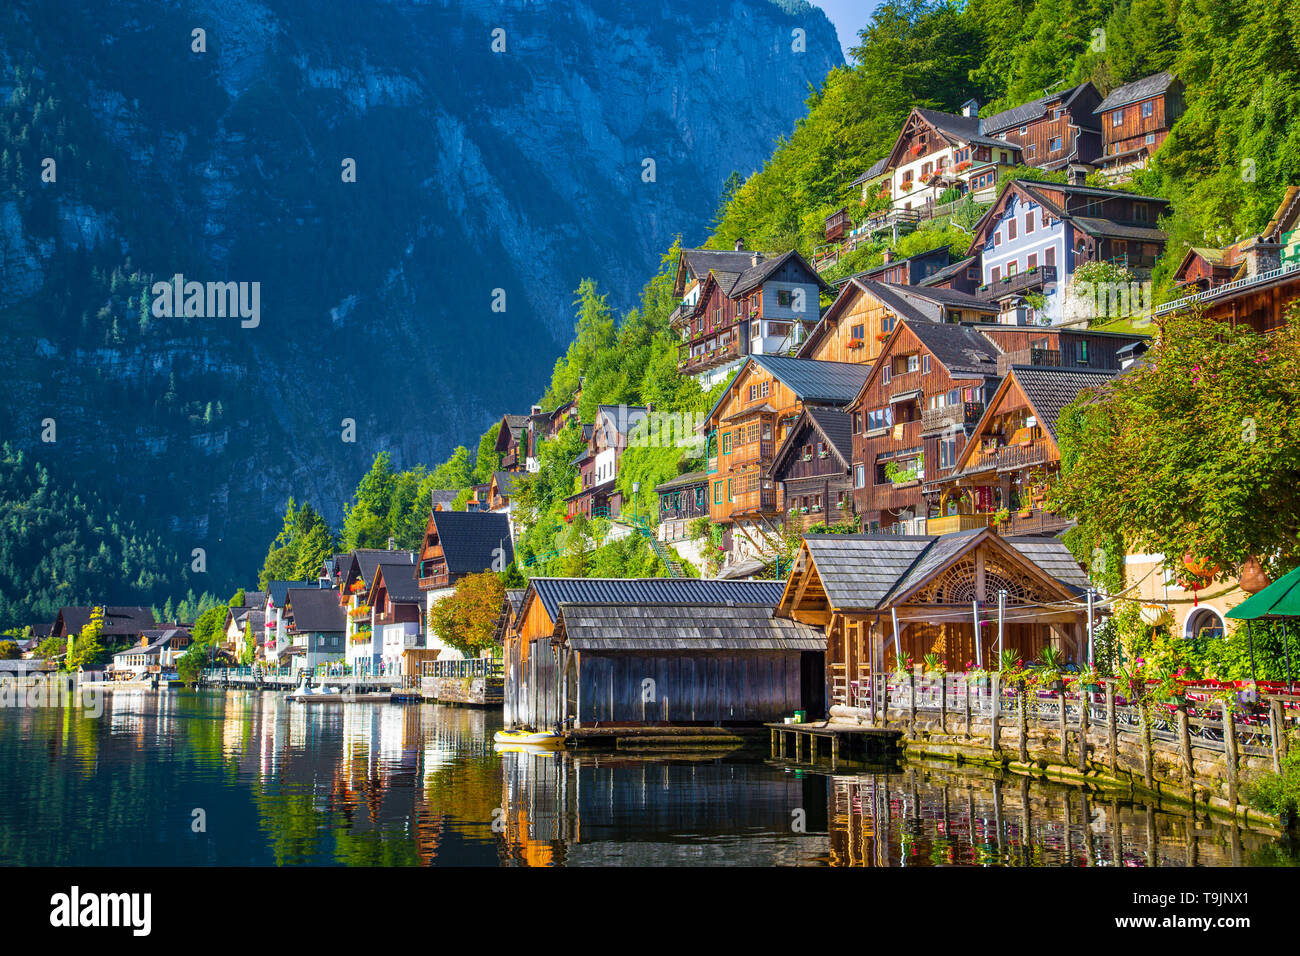 Traditional old wooden houses in famous Hallstatt mountain village at Hallstattersee lake in the Austrian Alps in summer, region of Salzkammergut, Aus Stock Photo